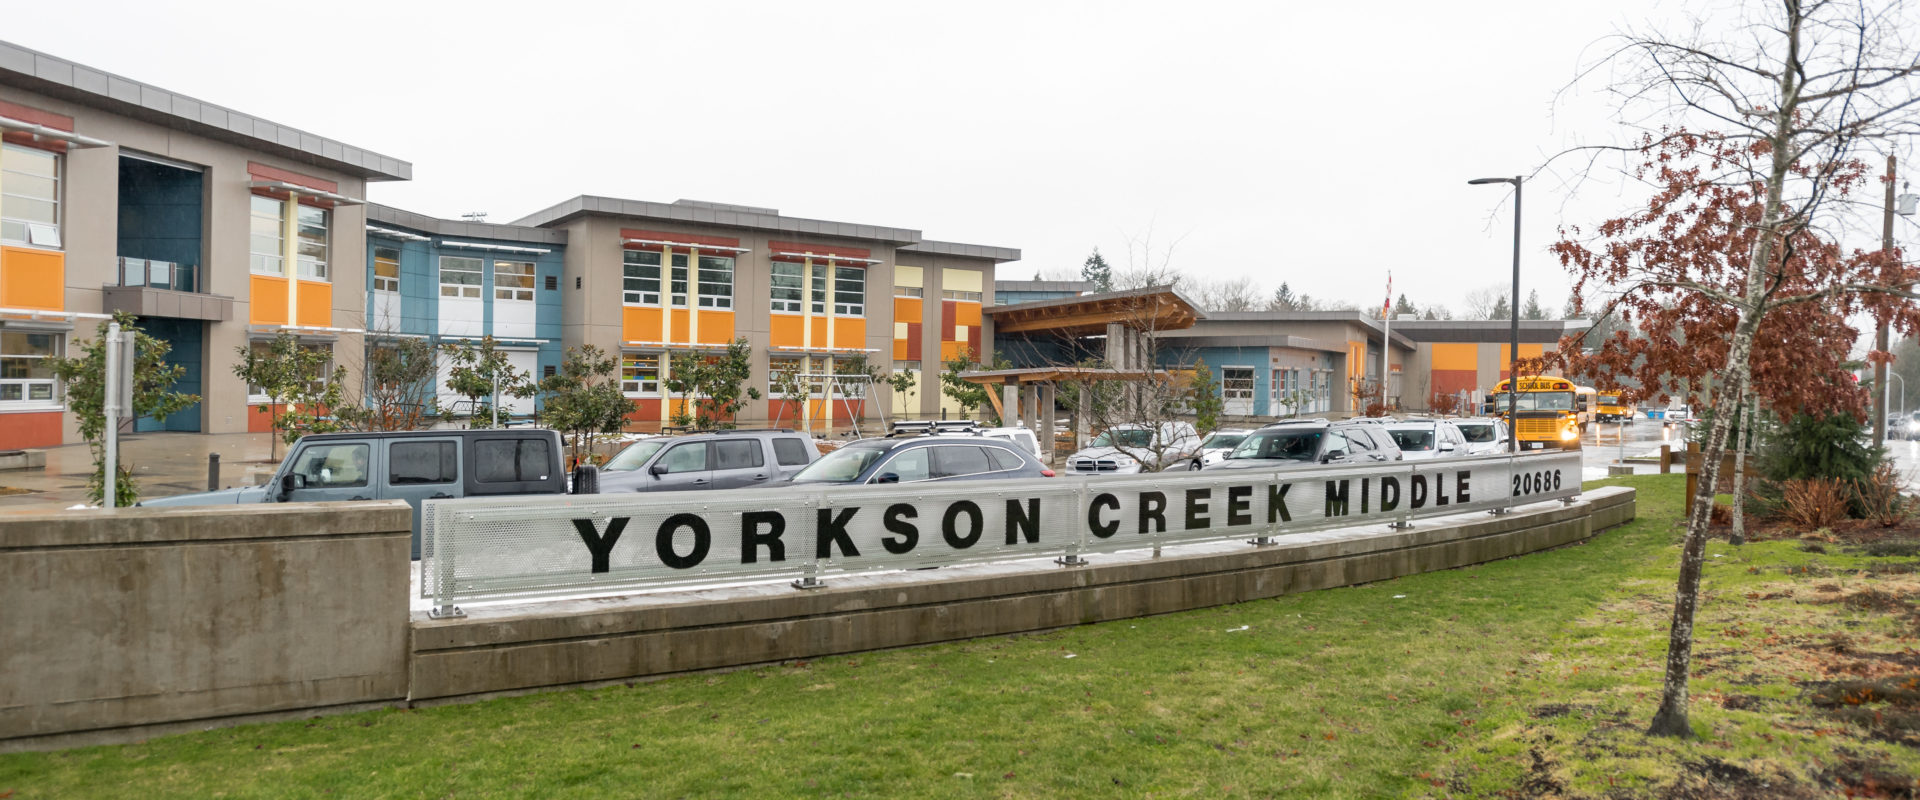 2145 sqft Luxurious townhome in Yorkson Creek (Langley)